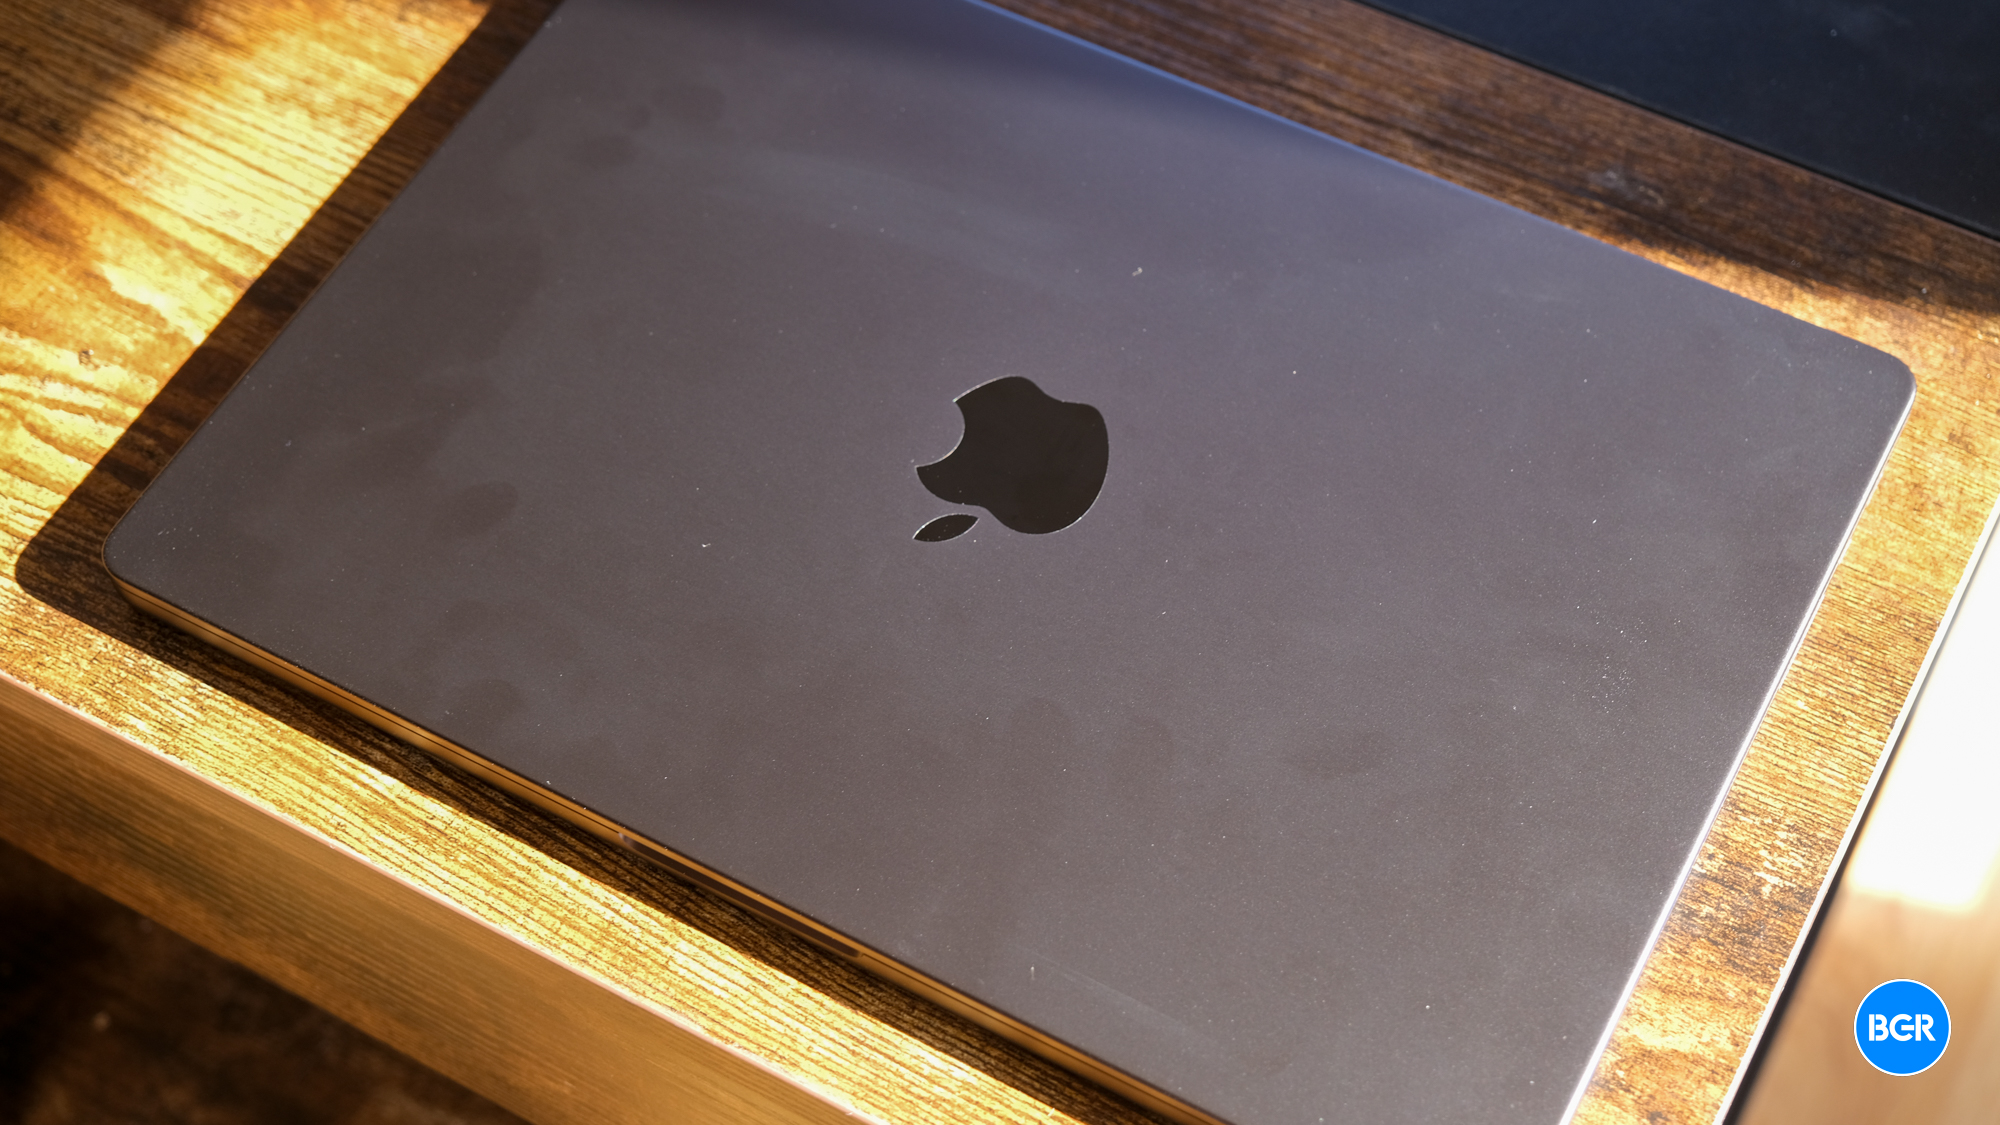 M3 MacBook Pro 14-inch real-life test shows ‘epic’ battery life